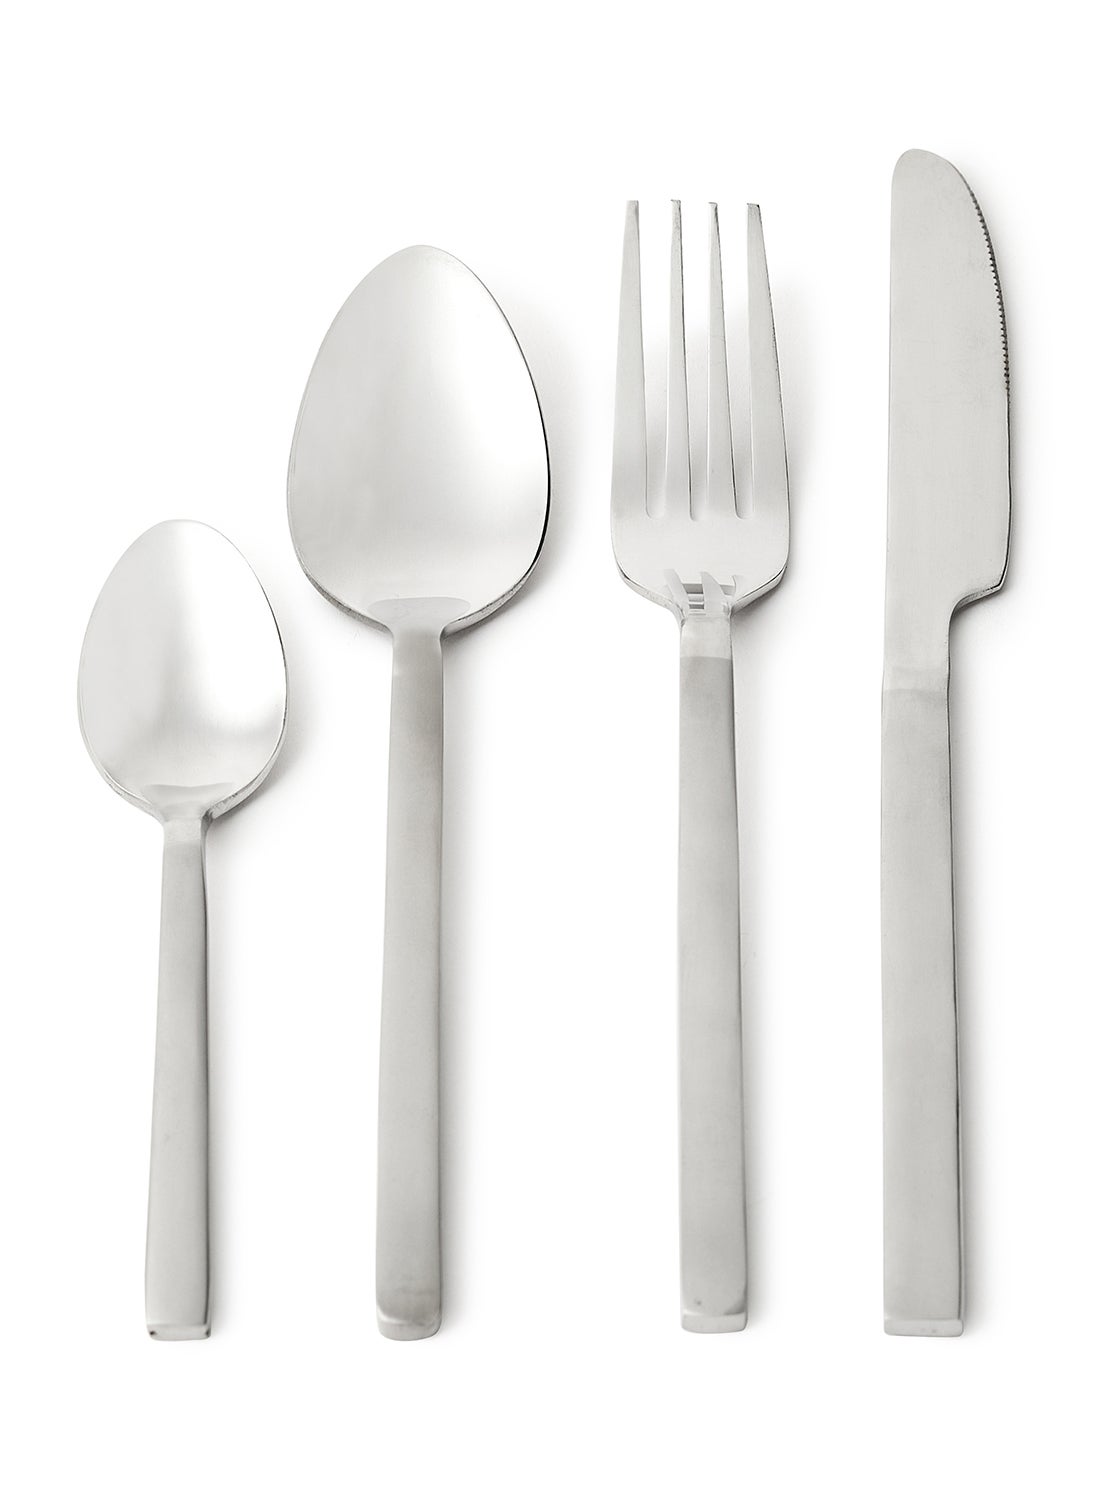 16 Piece Cutlery Set - Made Of Stainless Steel - Silverware Flatware - Spoons And Forks Set, Spoon Set - Table Spoons, Tea Spoons, Forks, Knives - Serves 4 - Design Silver Antila 